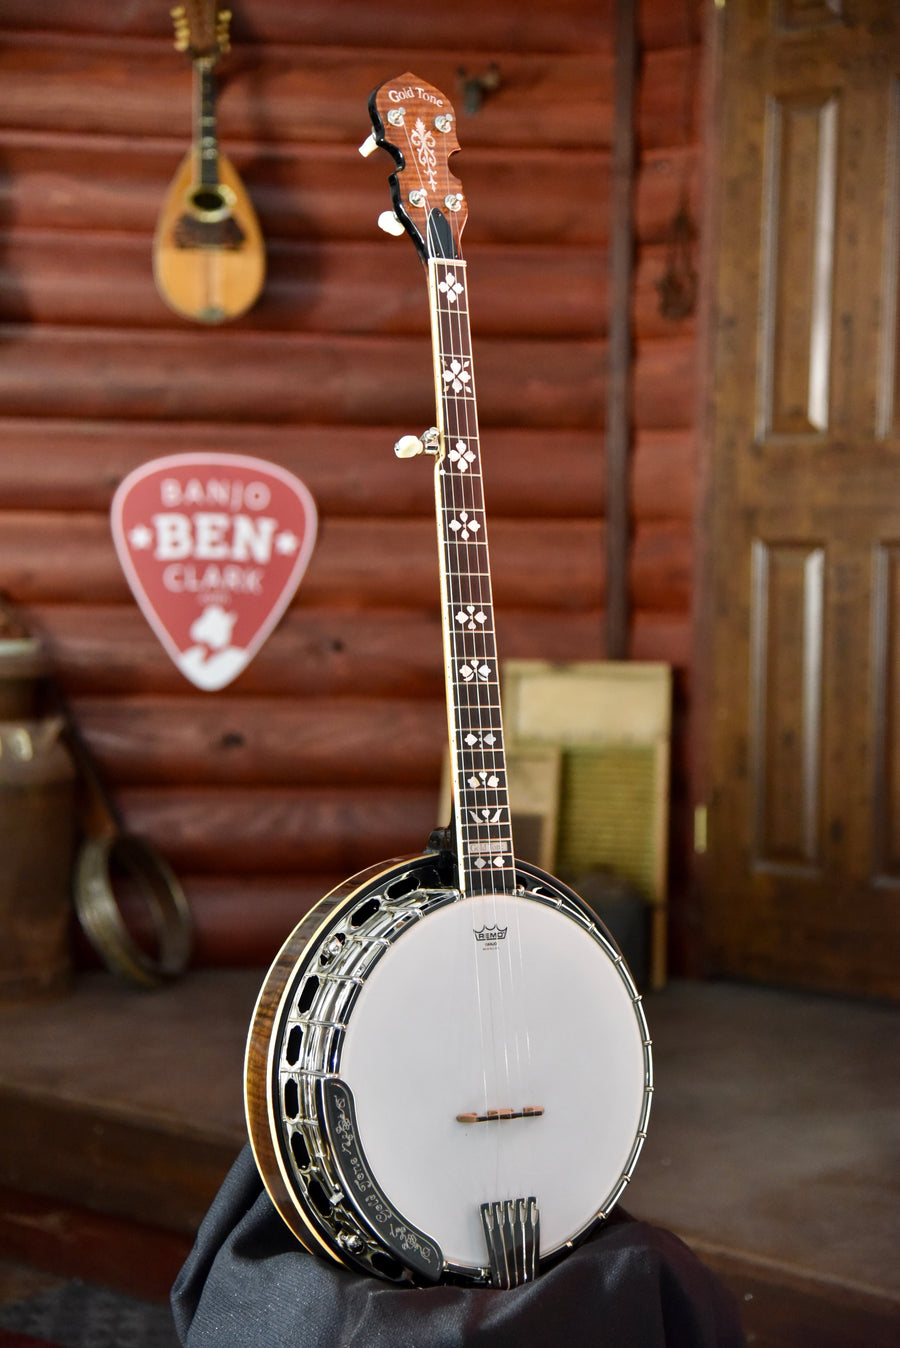 Gold Tone Mastertone™ OB-250 Plus 5-String Banjo With Tony Pass Rim, JLS Tone Ring, And Radiused Fingerboard With Case